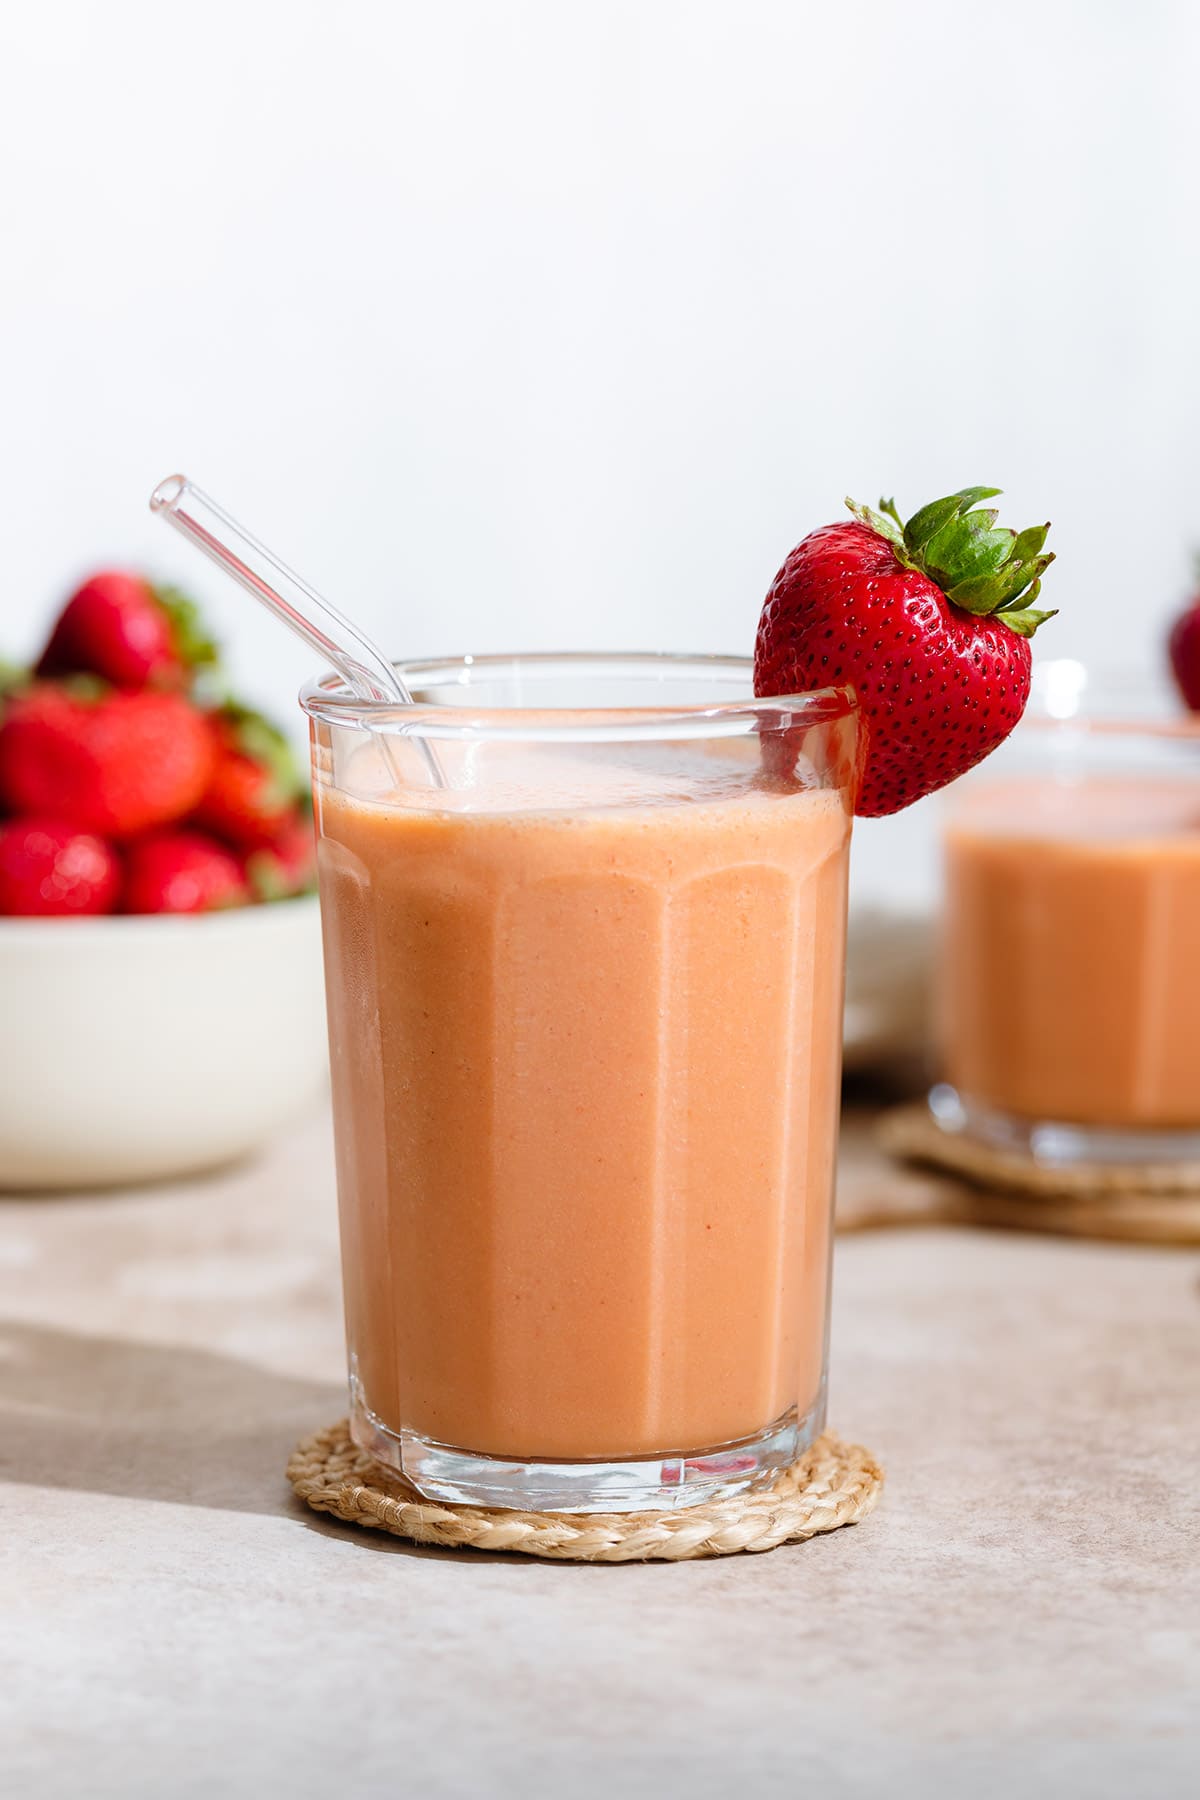 Peach colored smoothie in a tall glass with a glass straw and garnished with a fresh strawberry on the rim and more strawberries around it.